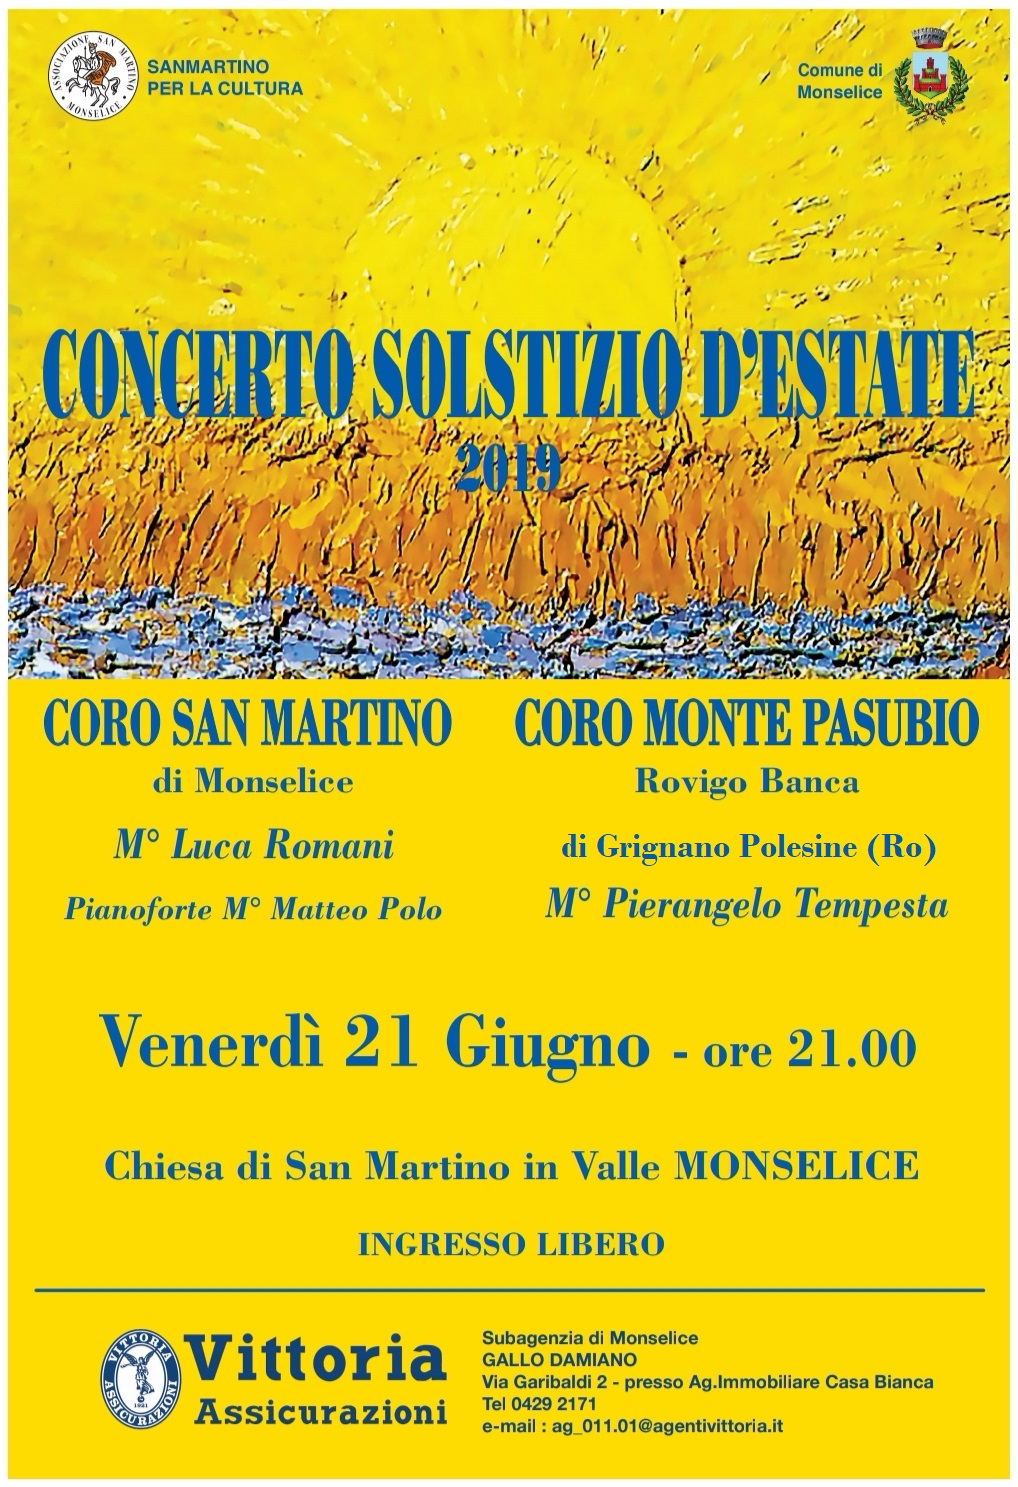 In canto a Monselice